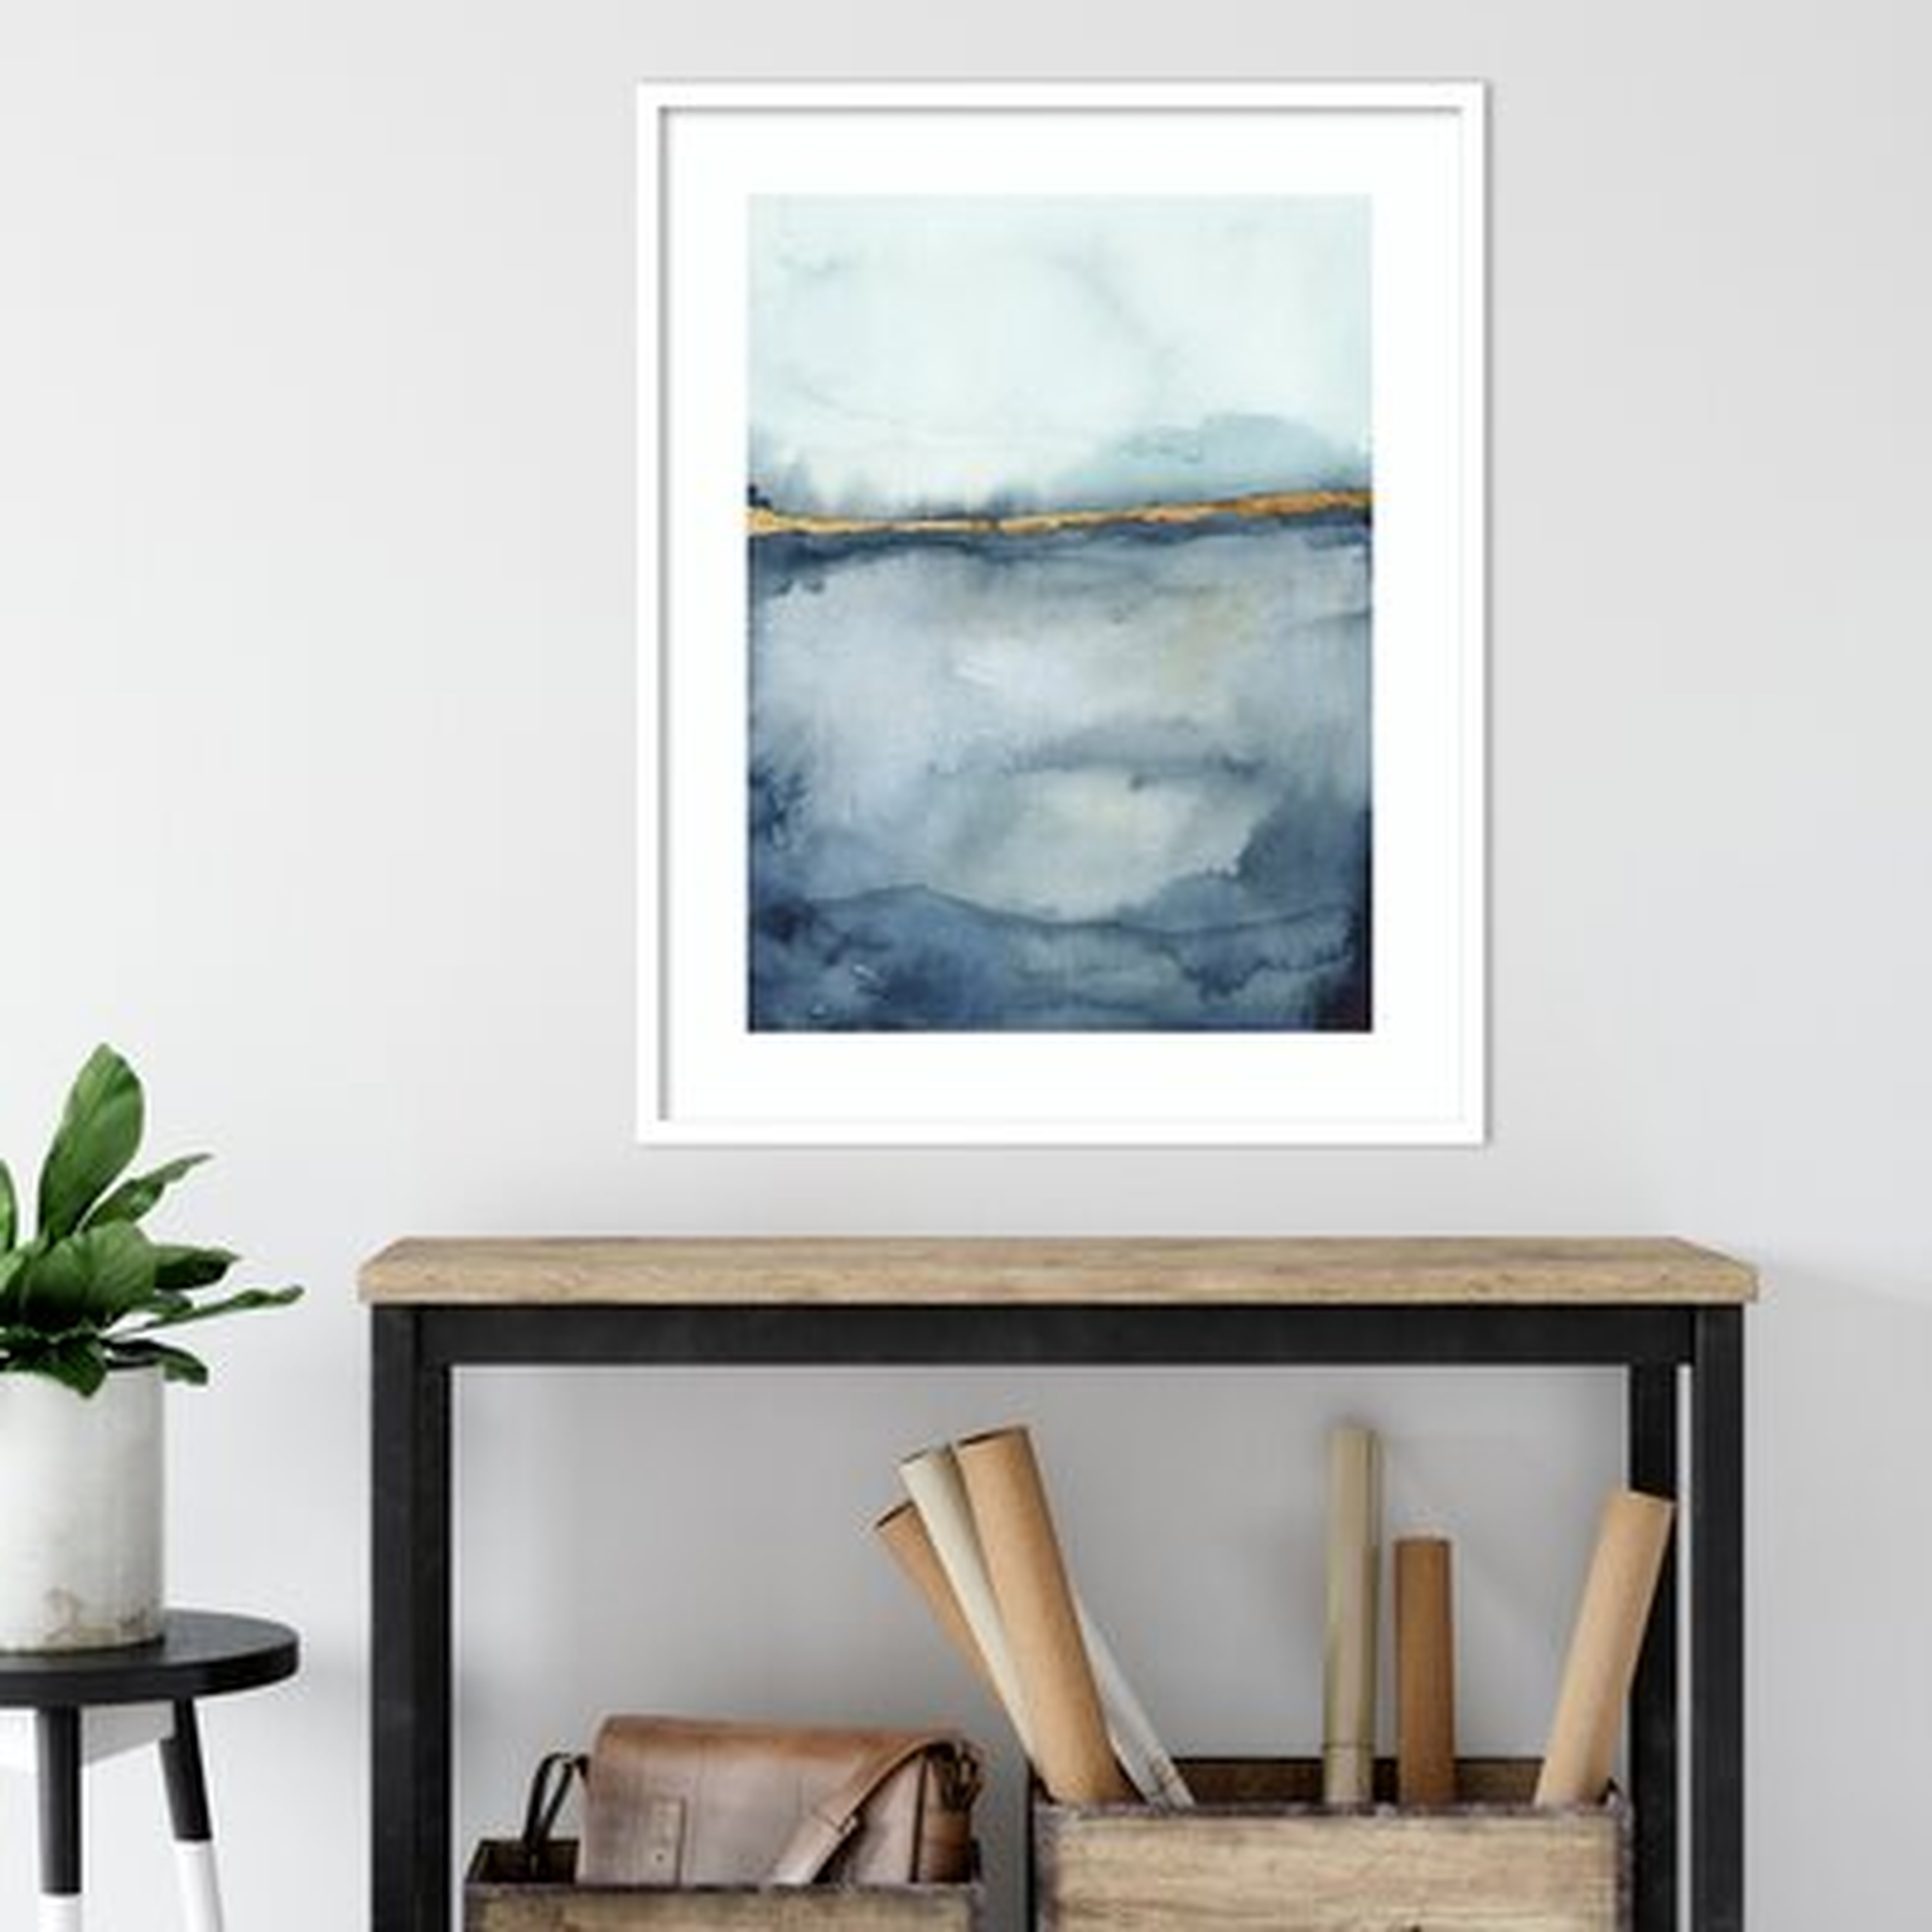 Coastal Horizon II by Victoria Borges - Picture Frame Graphic Art Print on Paper - AllModern